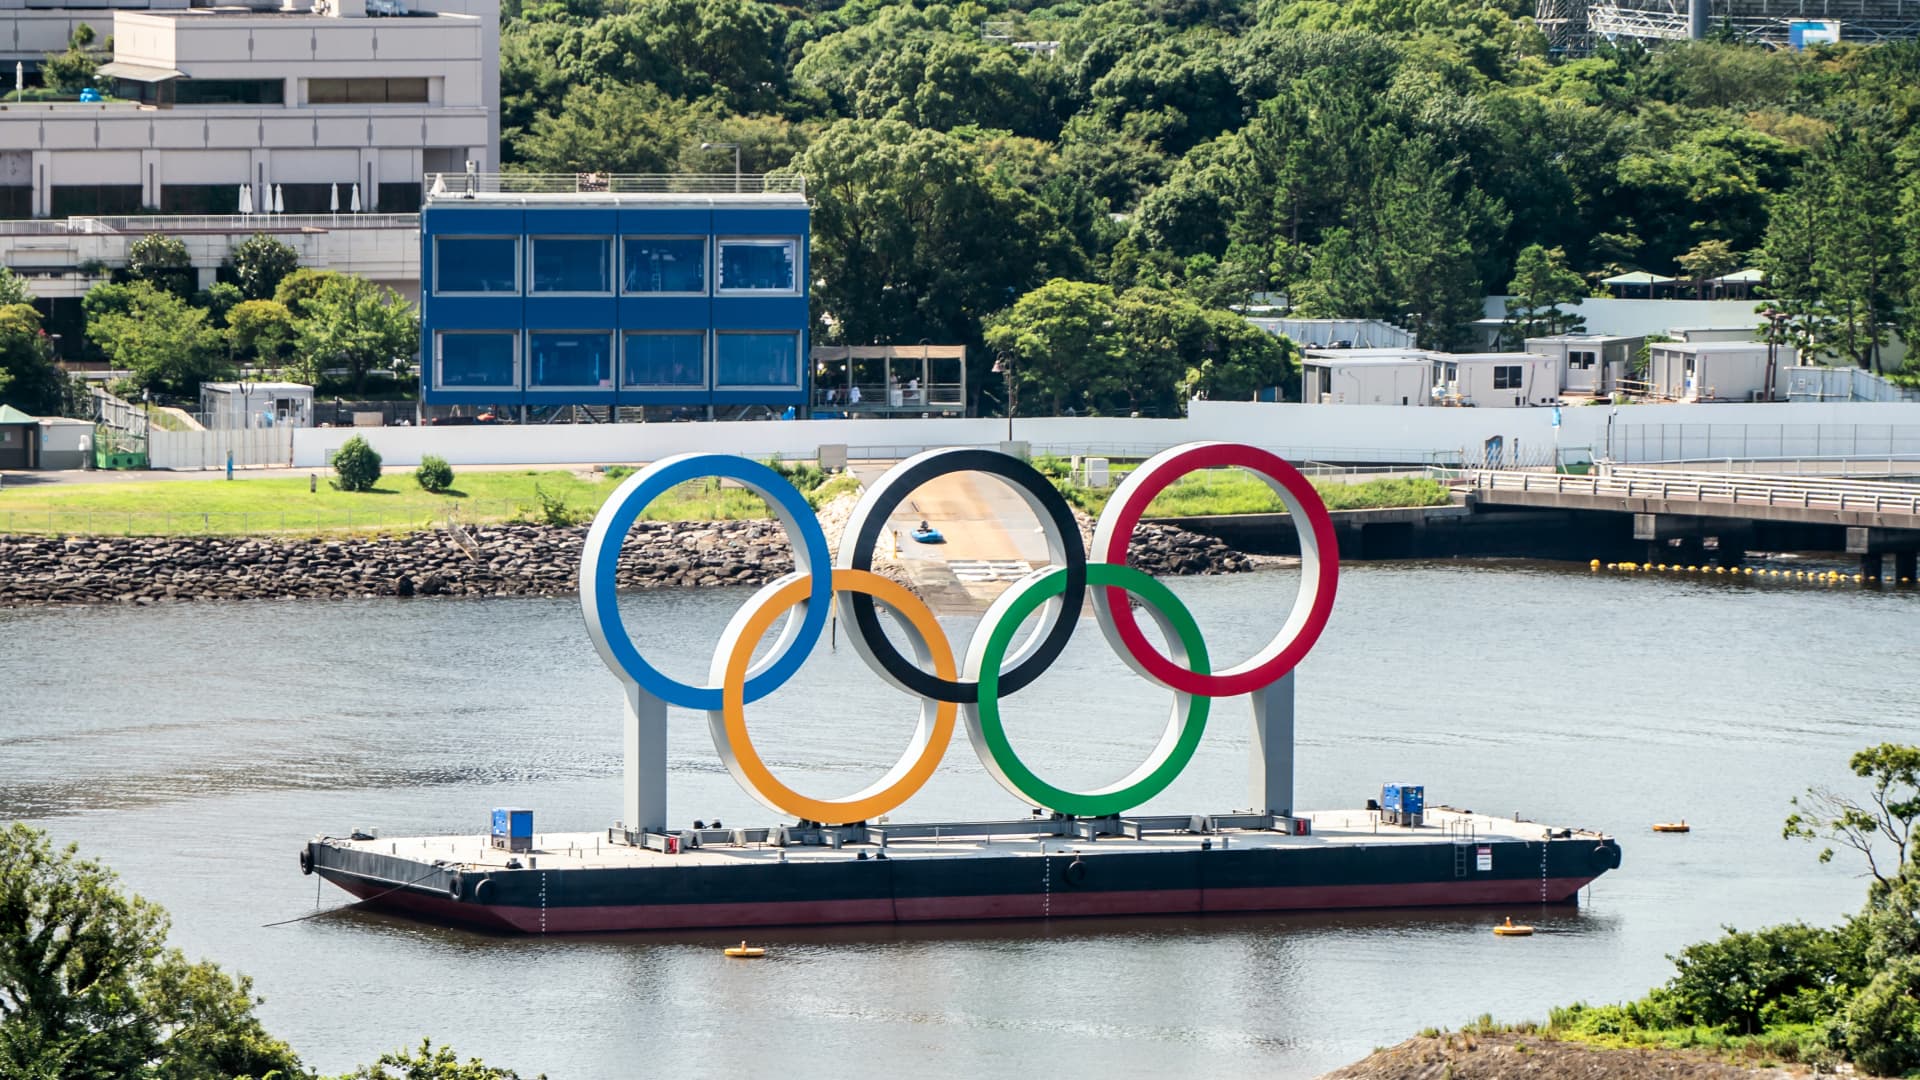 A view of the Olympic rings in Tokyo ahead of the Tokyo 2020 Olympic Games in Japan.